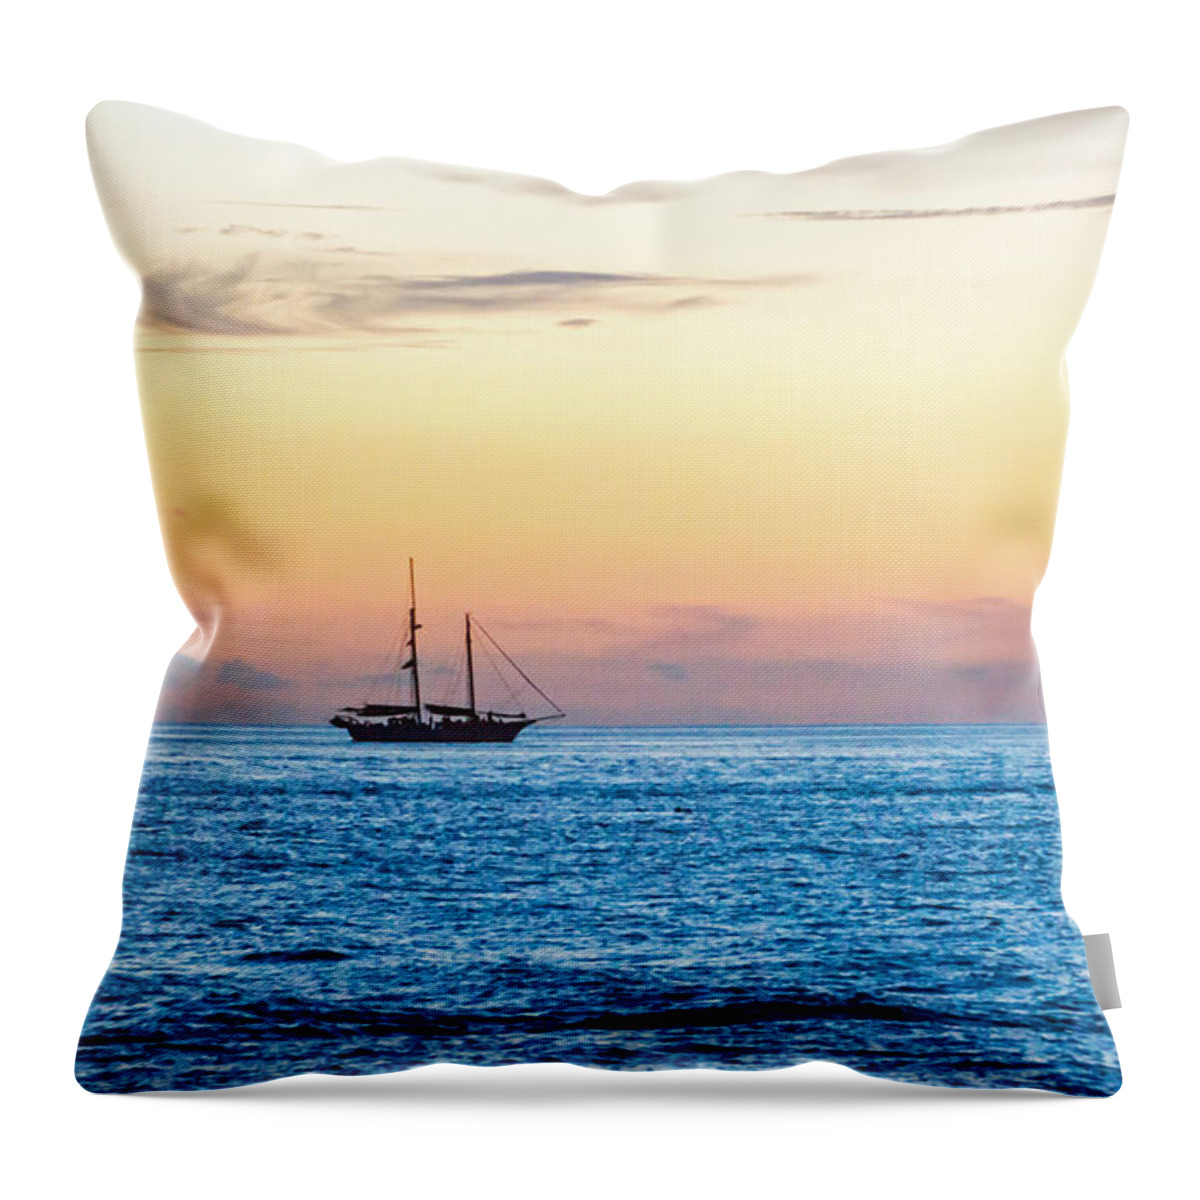 Key West Throw Pillow featuring the photograph Sailboats at Sunset off Key West Florida by Photographic Arts And Design Studio